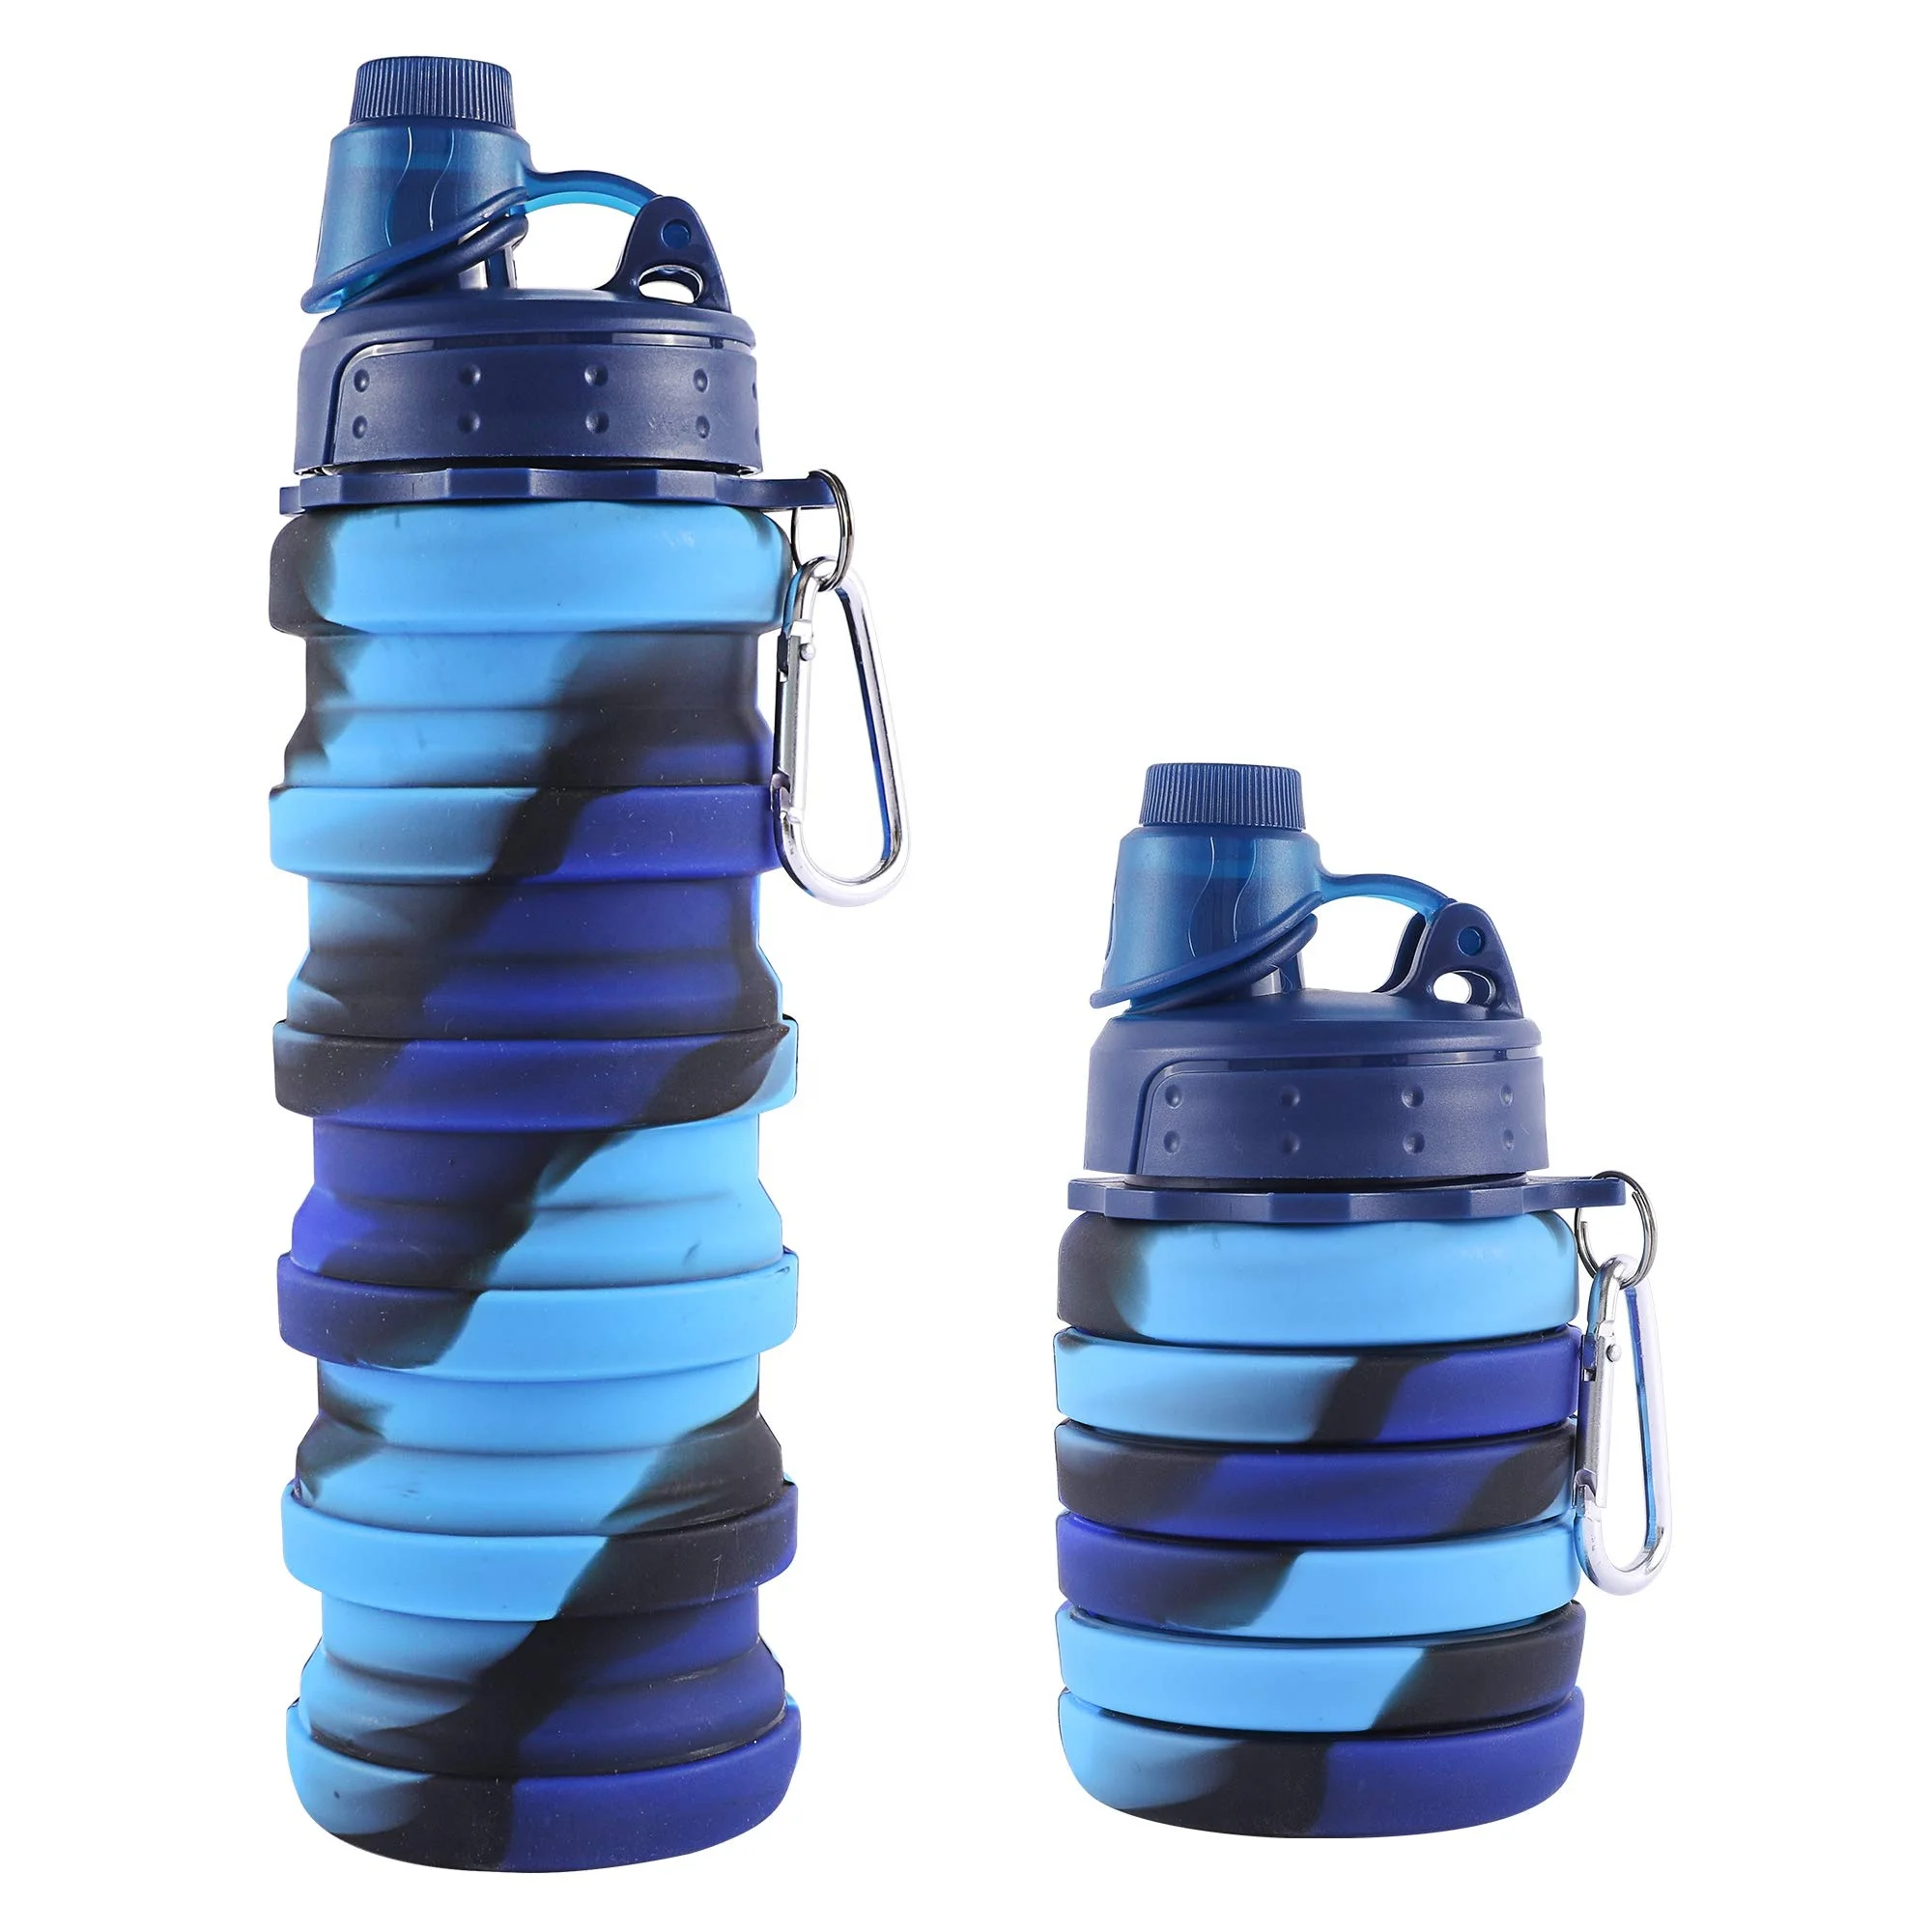 

Travel Camping Hiking Rainbow Collapsible Sports Water Bottle for Kids Reusable BPA Free Silicone Foldable Water Bottles